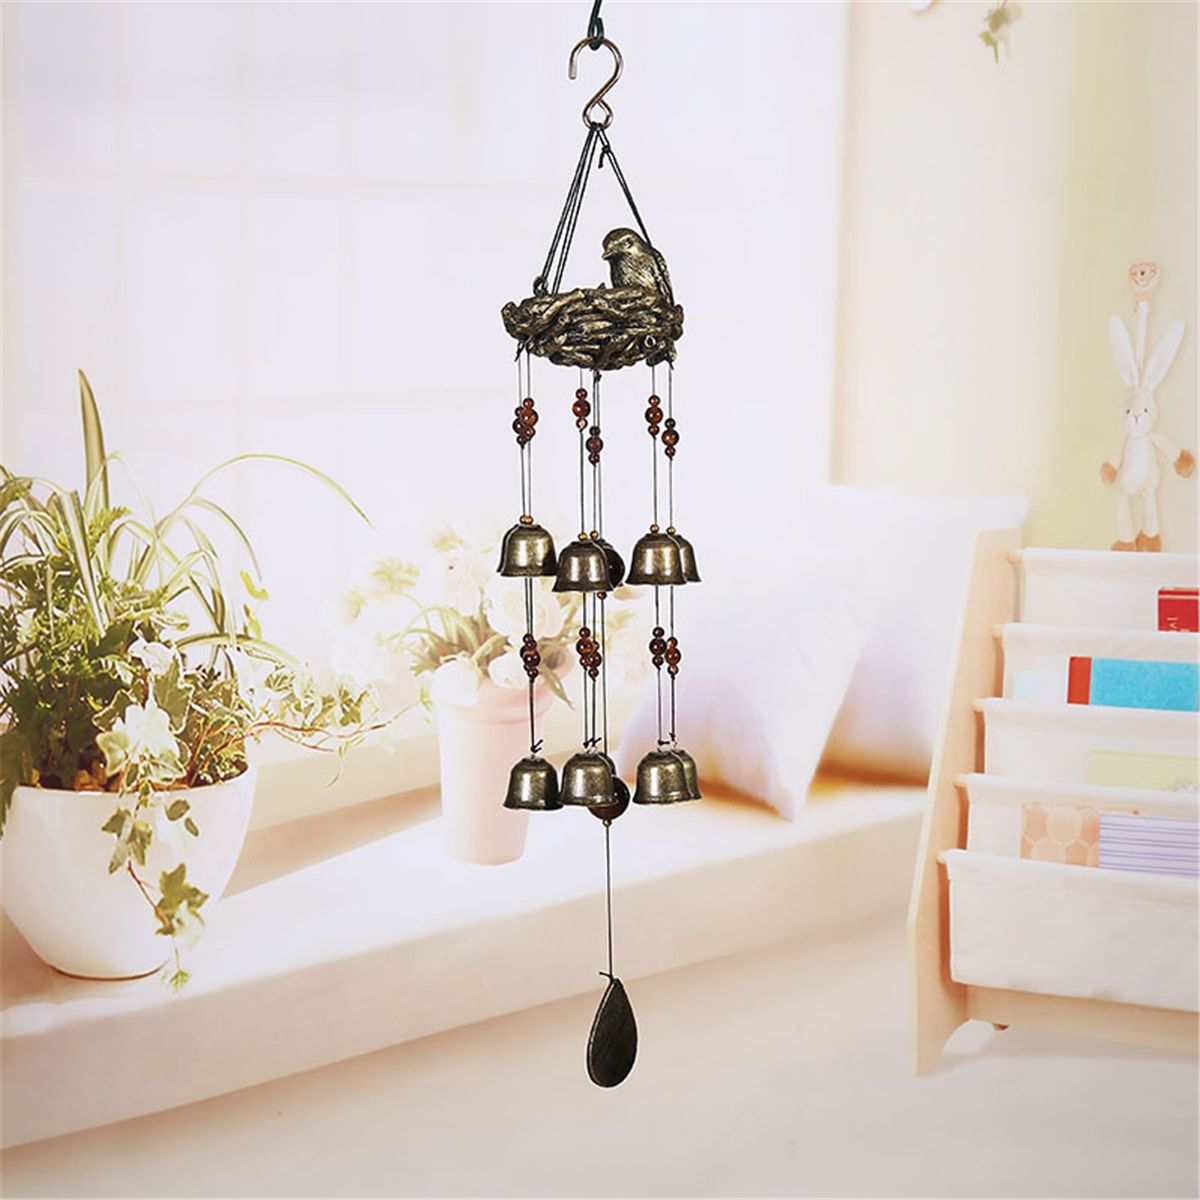 Resin-Birds-Nest-Wind-Chimes-Pendant-Cross-Border-Exclusively-For-Brass-Bell-Wind-Chimes-Outdoor-Gar-1730986